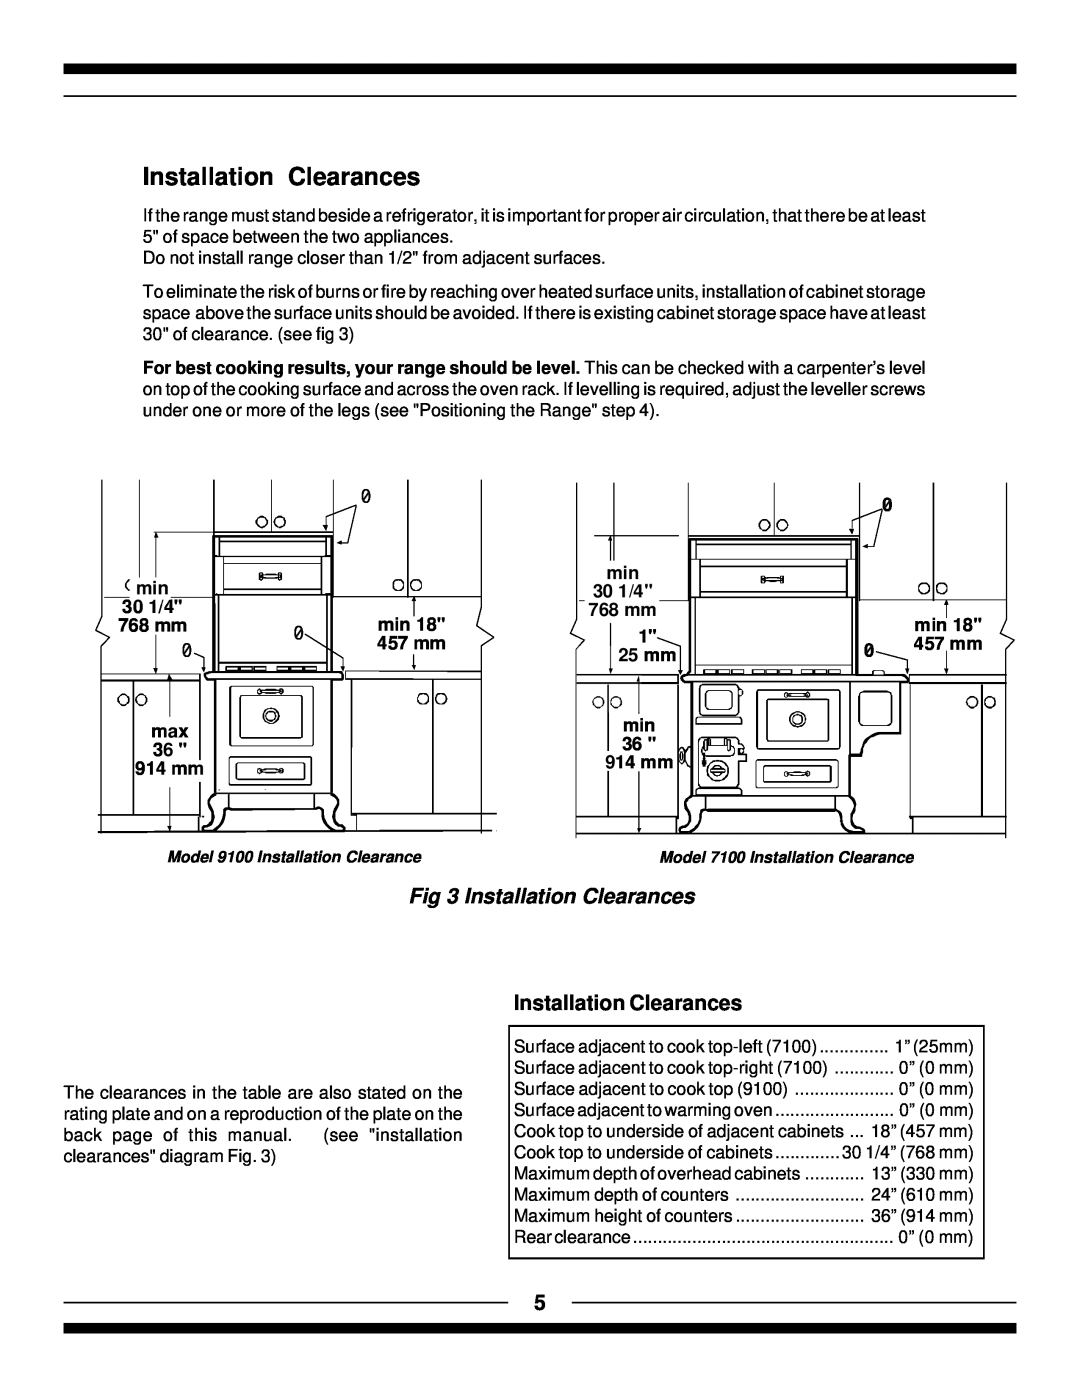 Hearth and Home Technologies 9100, 7100 manual Installation Clearances, min 30 1/4 768 mm 1 25 mm min, 457 mm 